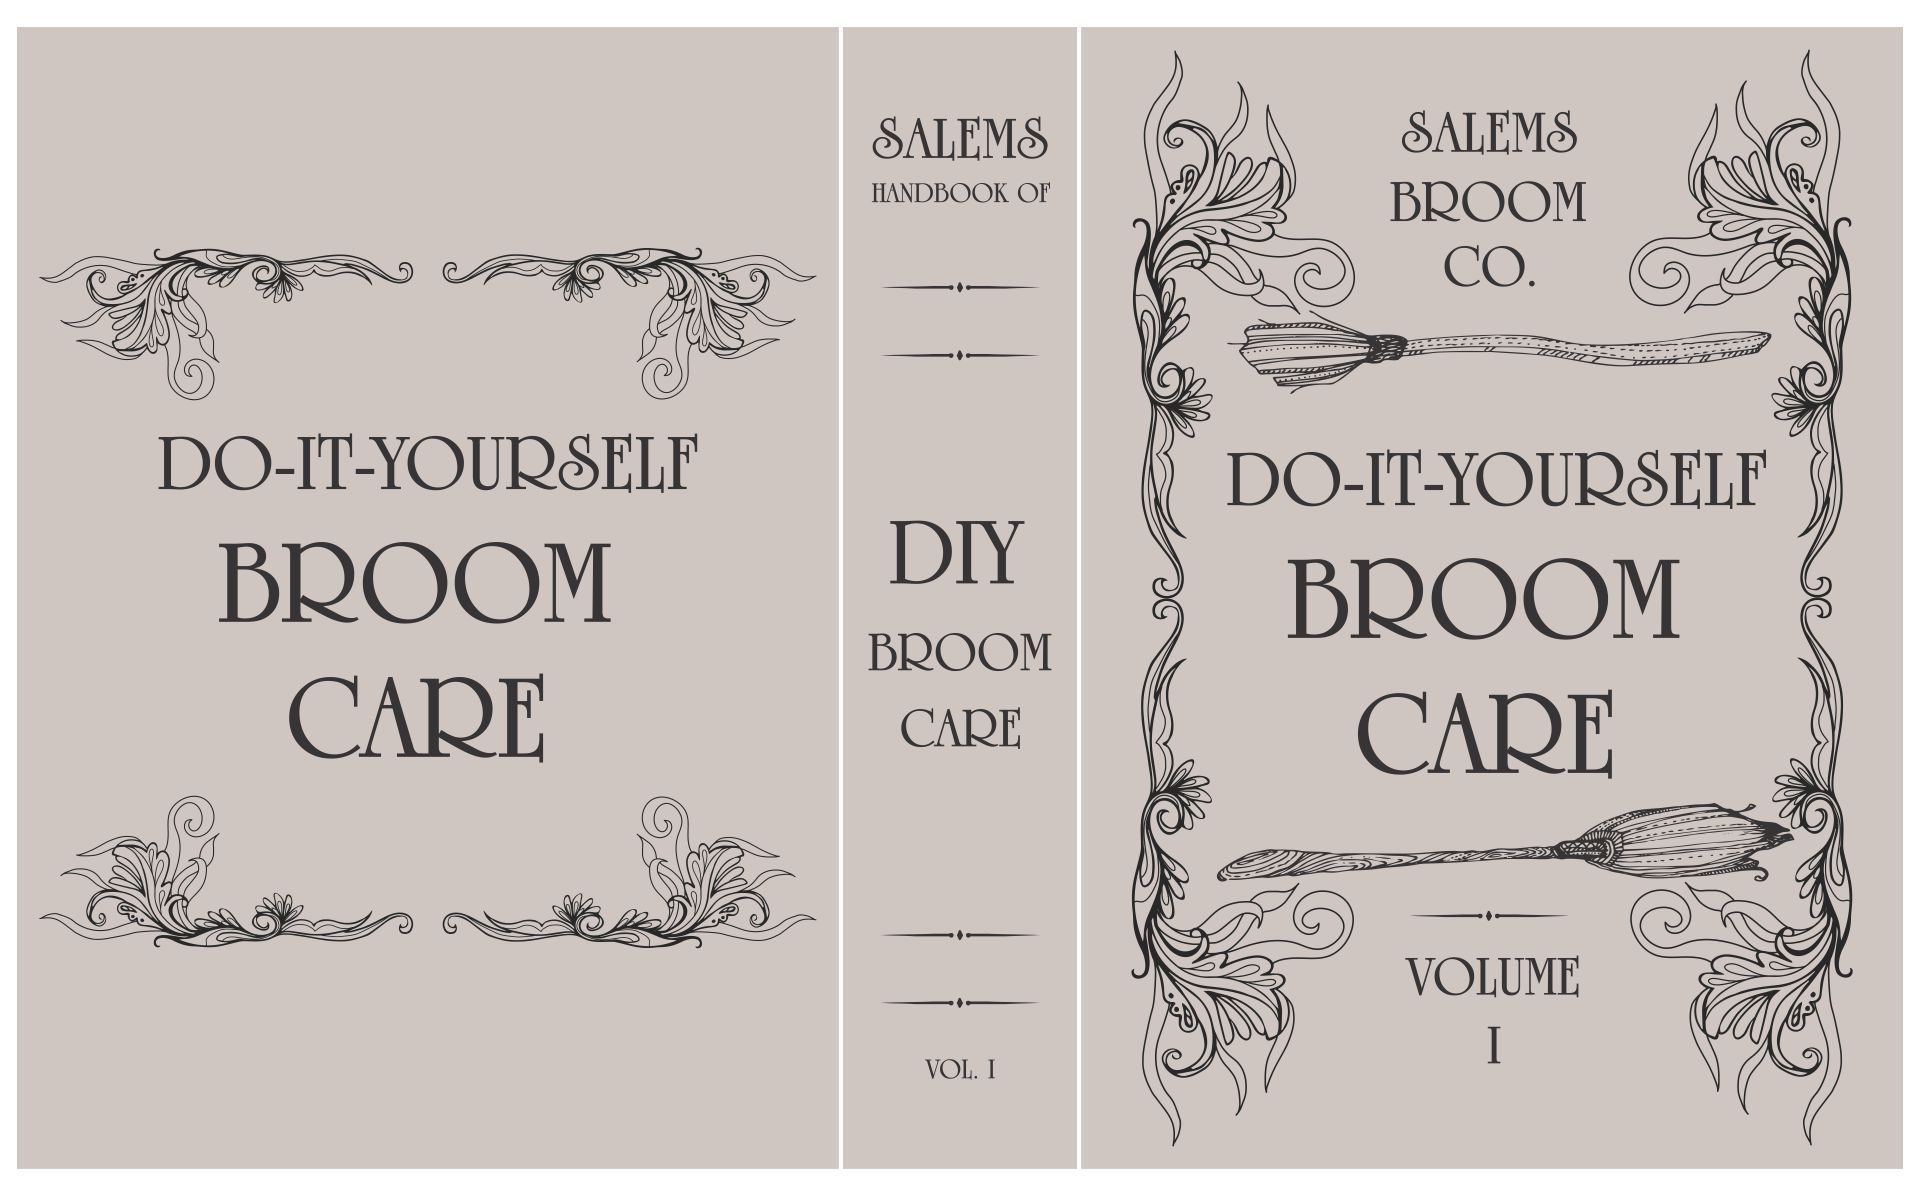 Free Printable Halloween Spell Book Cover Printable Halloween Book Covers Halloween Spell Book Halloween Books